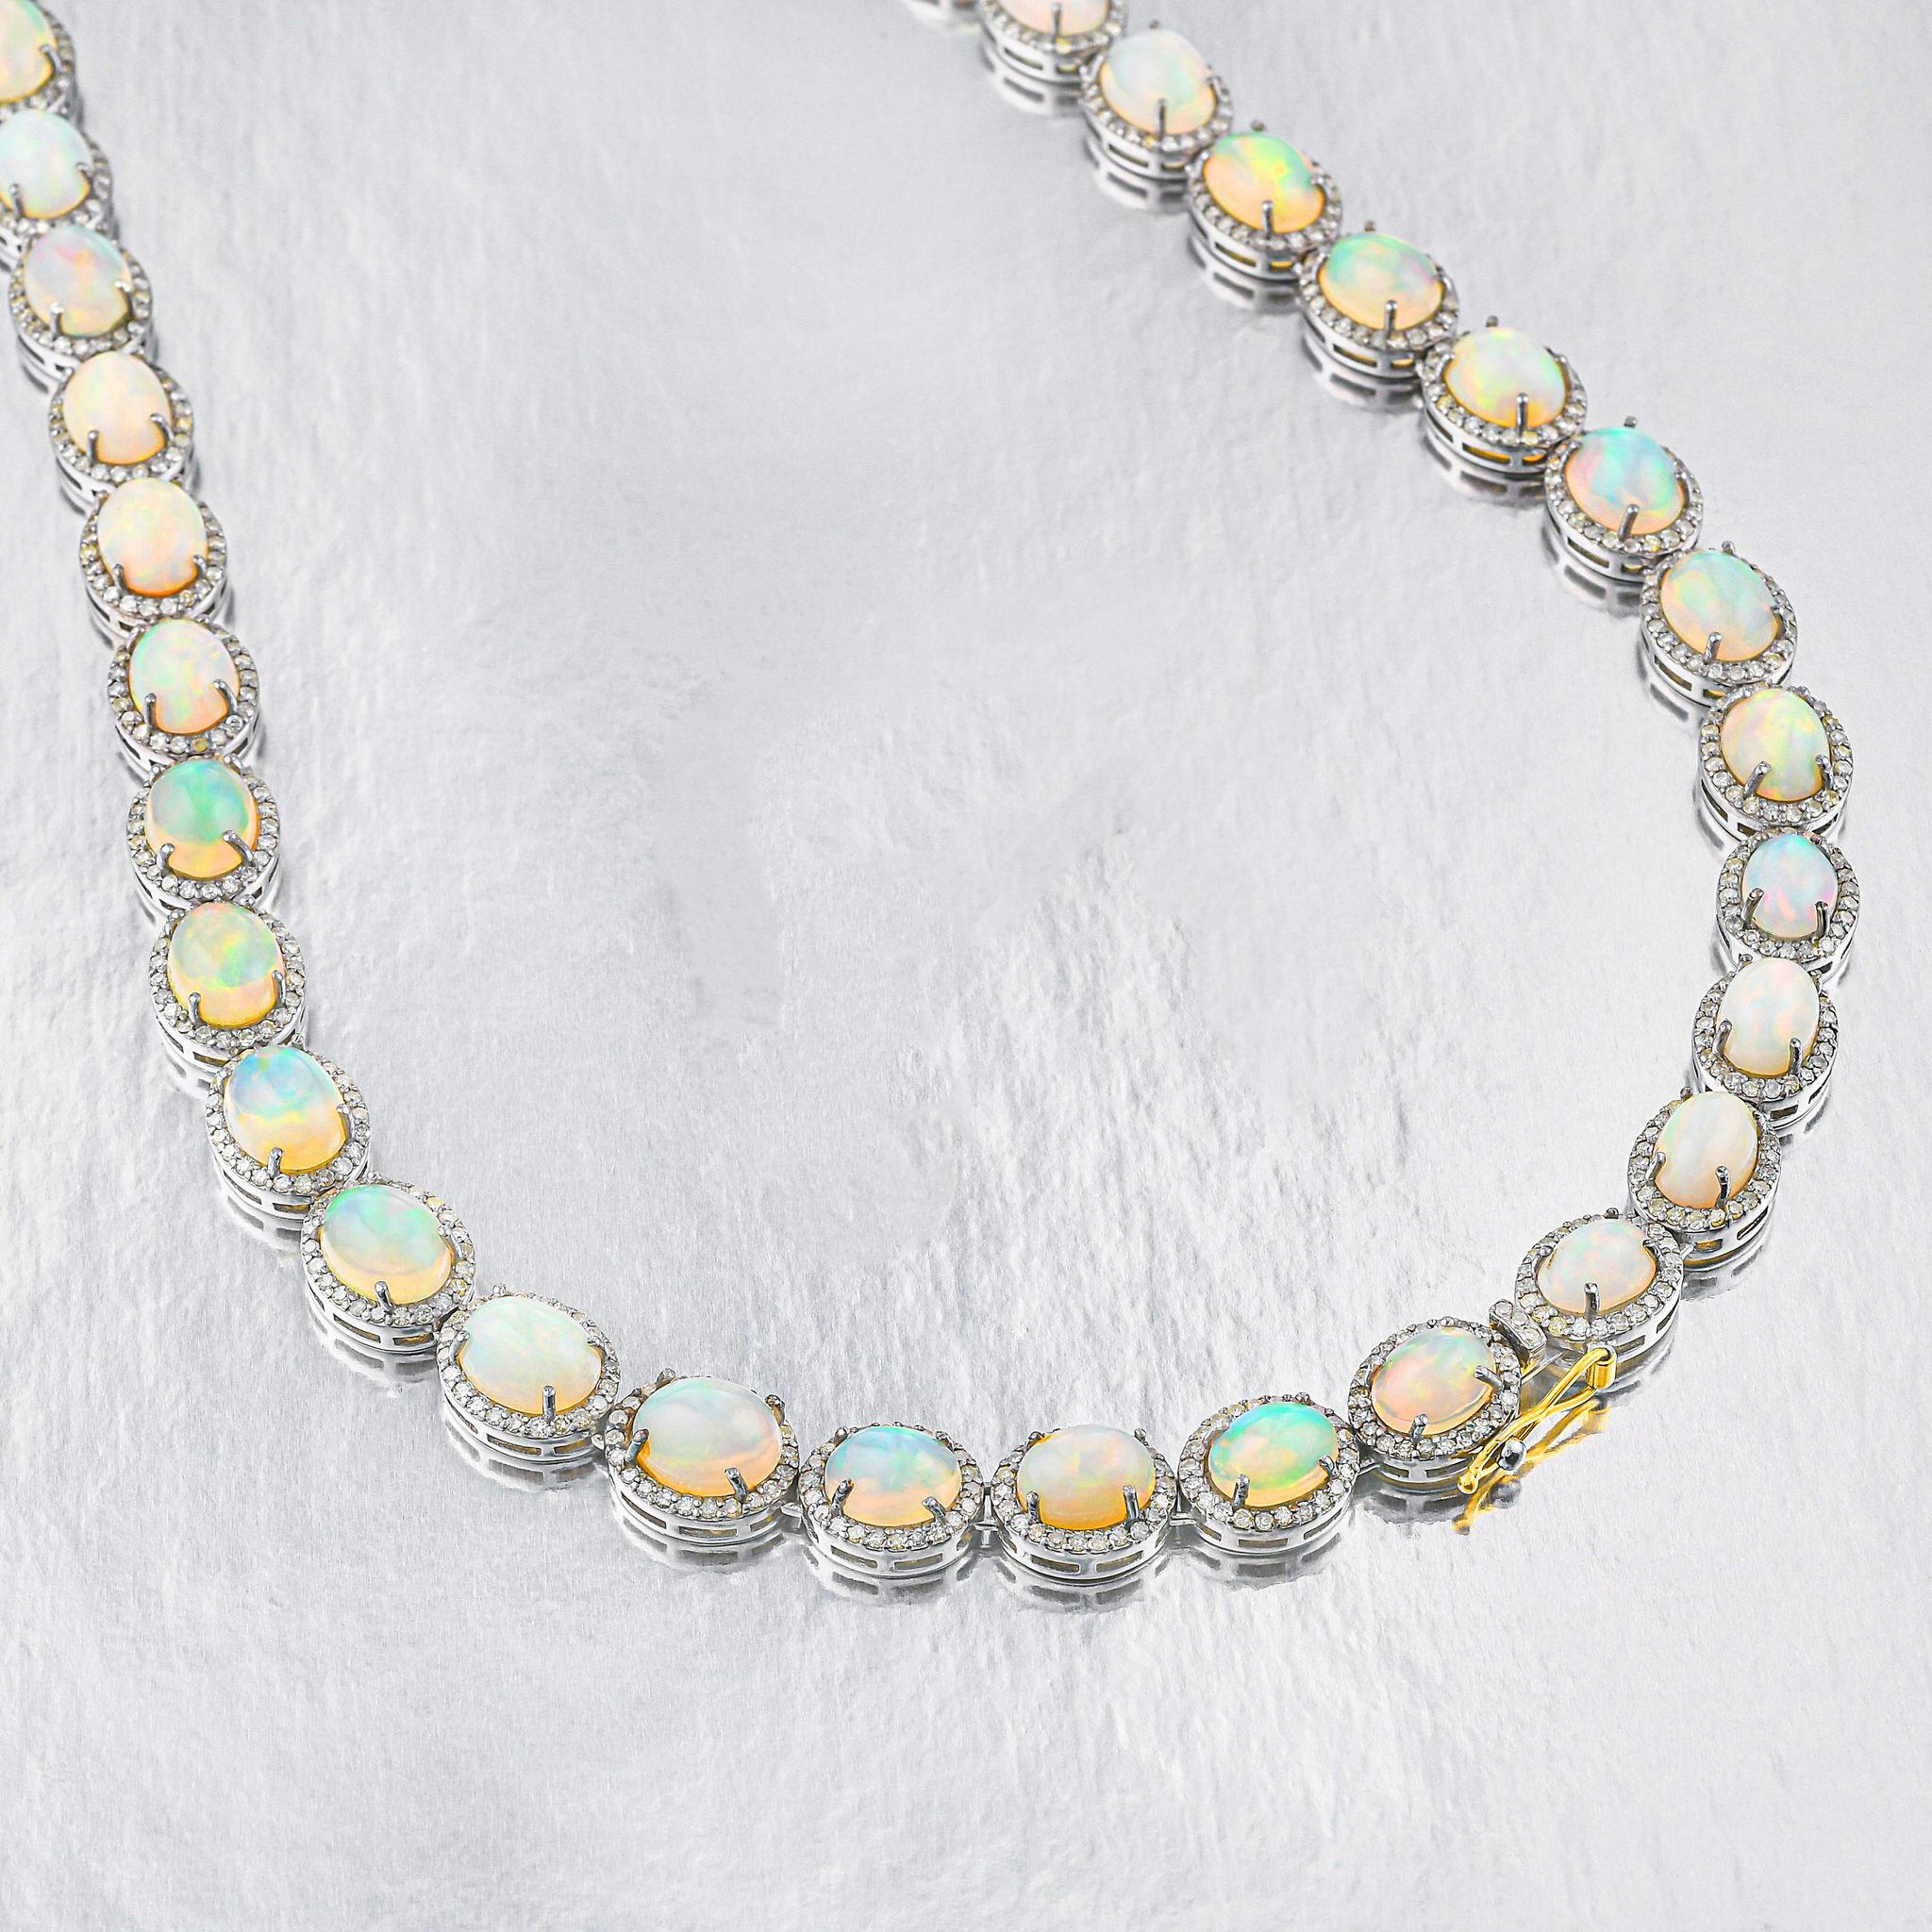 Women's or Men's Important Opal Jewelry Suite Set With Diamonds 69 Carats Total For Sale